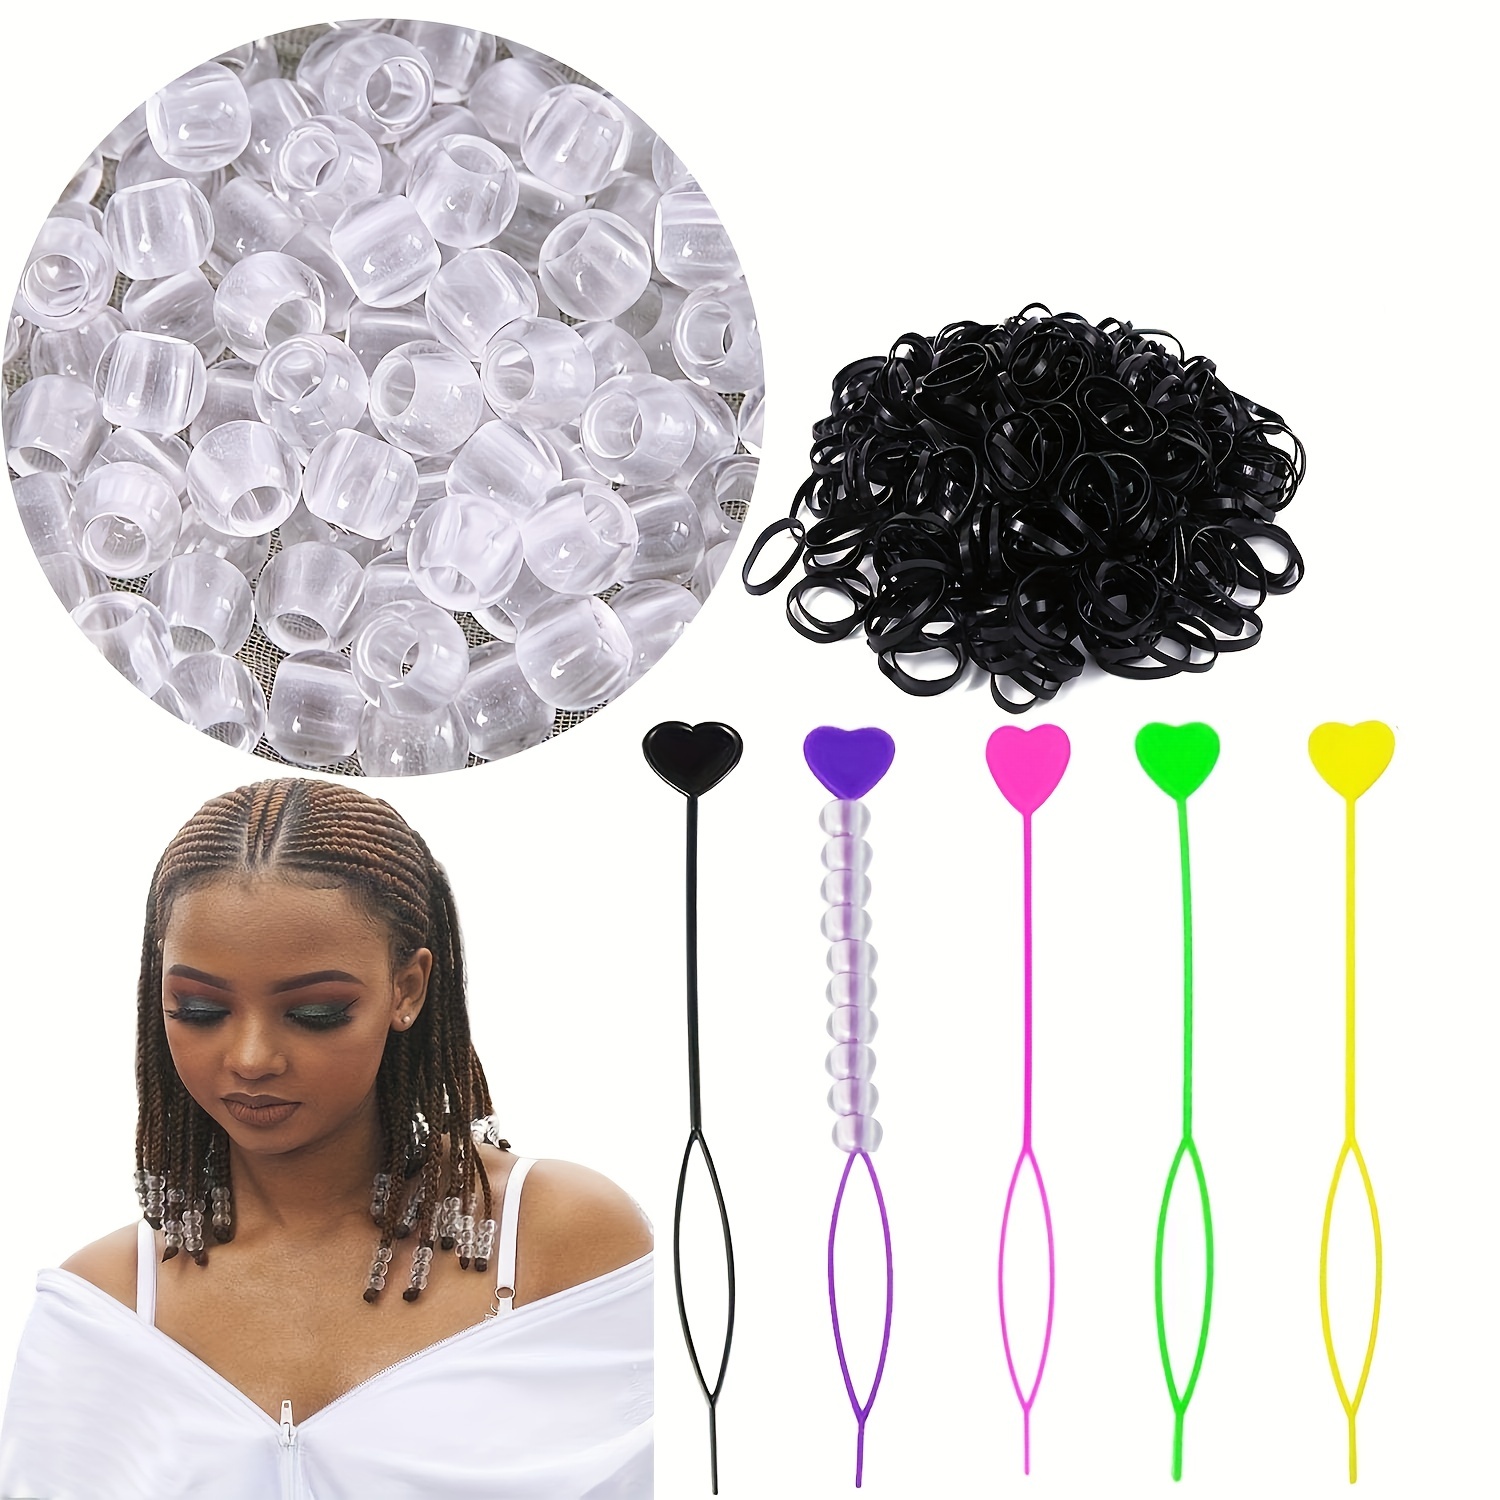 8 Pieces Quick Hair Beader Tool + 1000 Pieces Mini Rubber BandsLoading  Beads/Automatic Hair Beader and Styling Kit Ponytail Maker Styling Tool